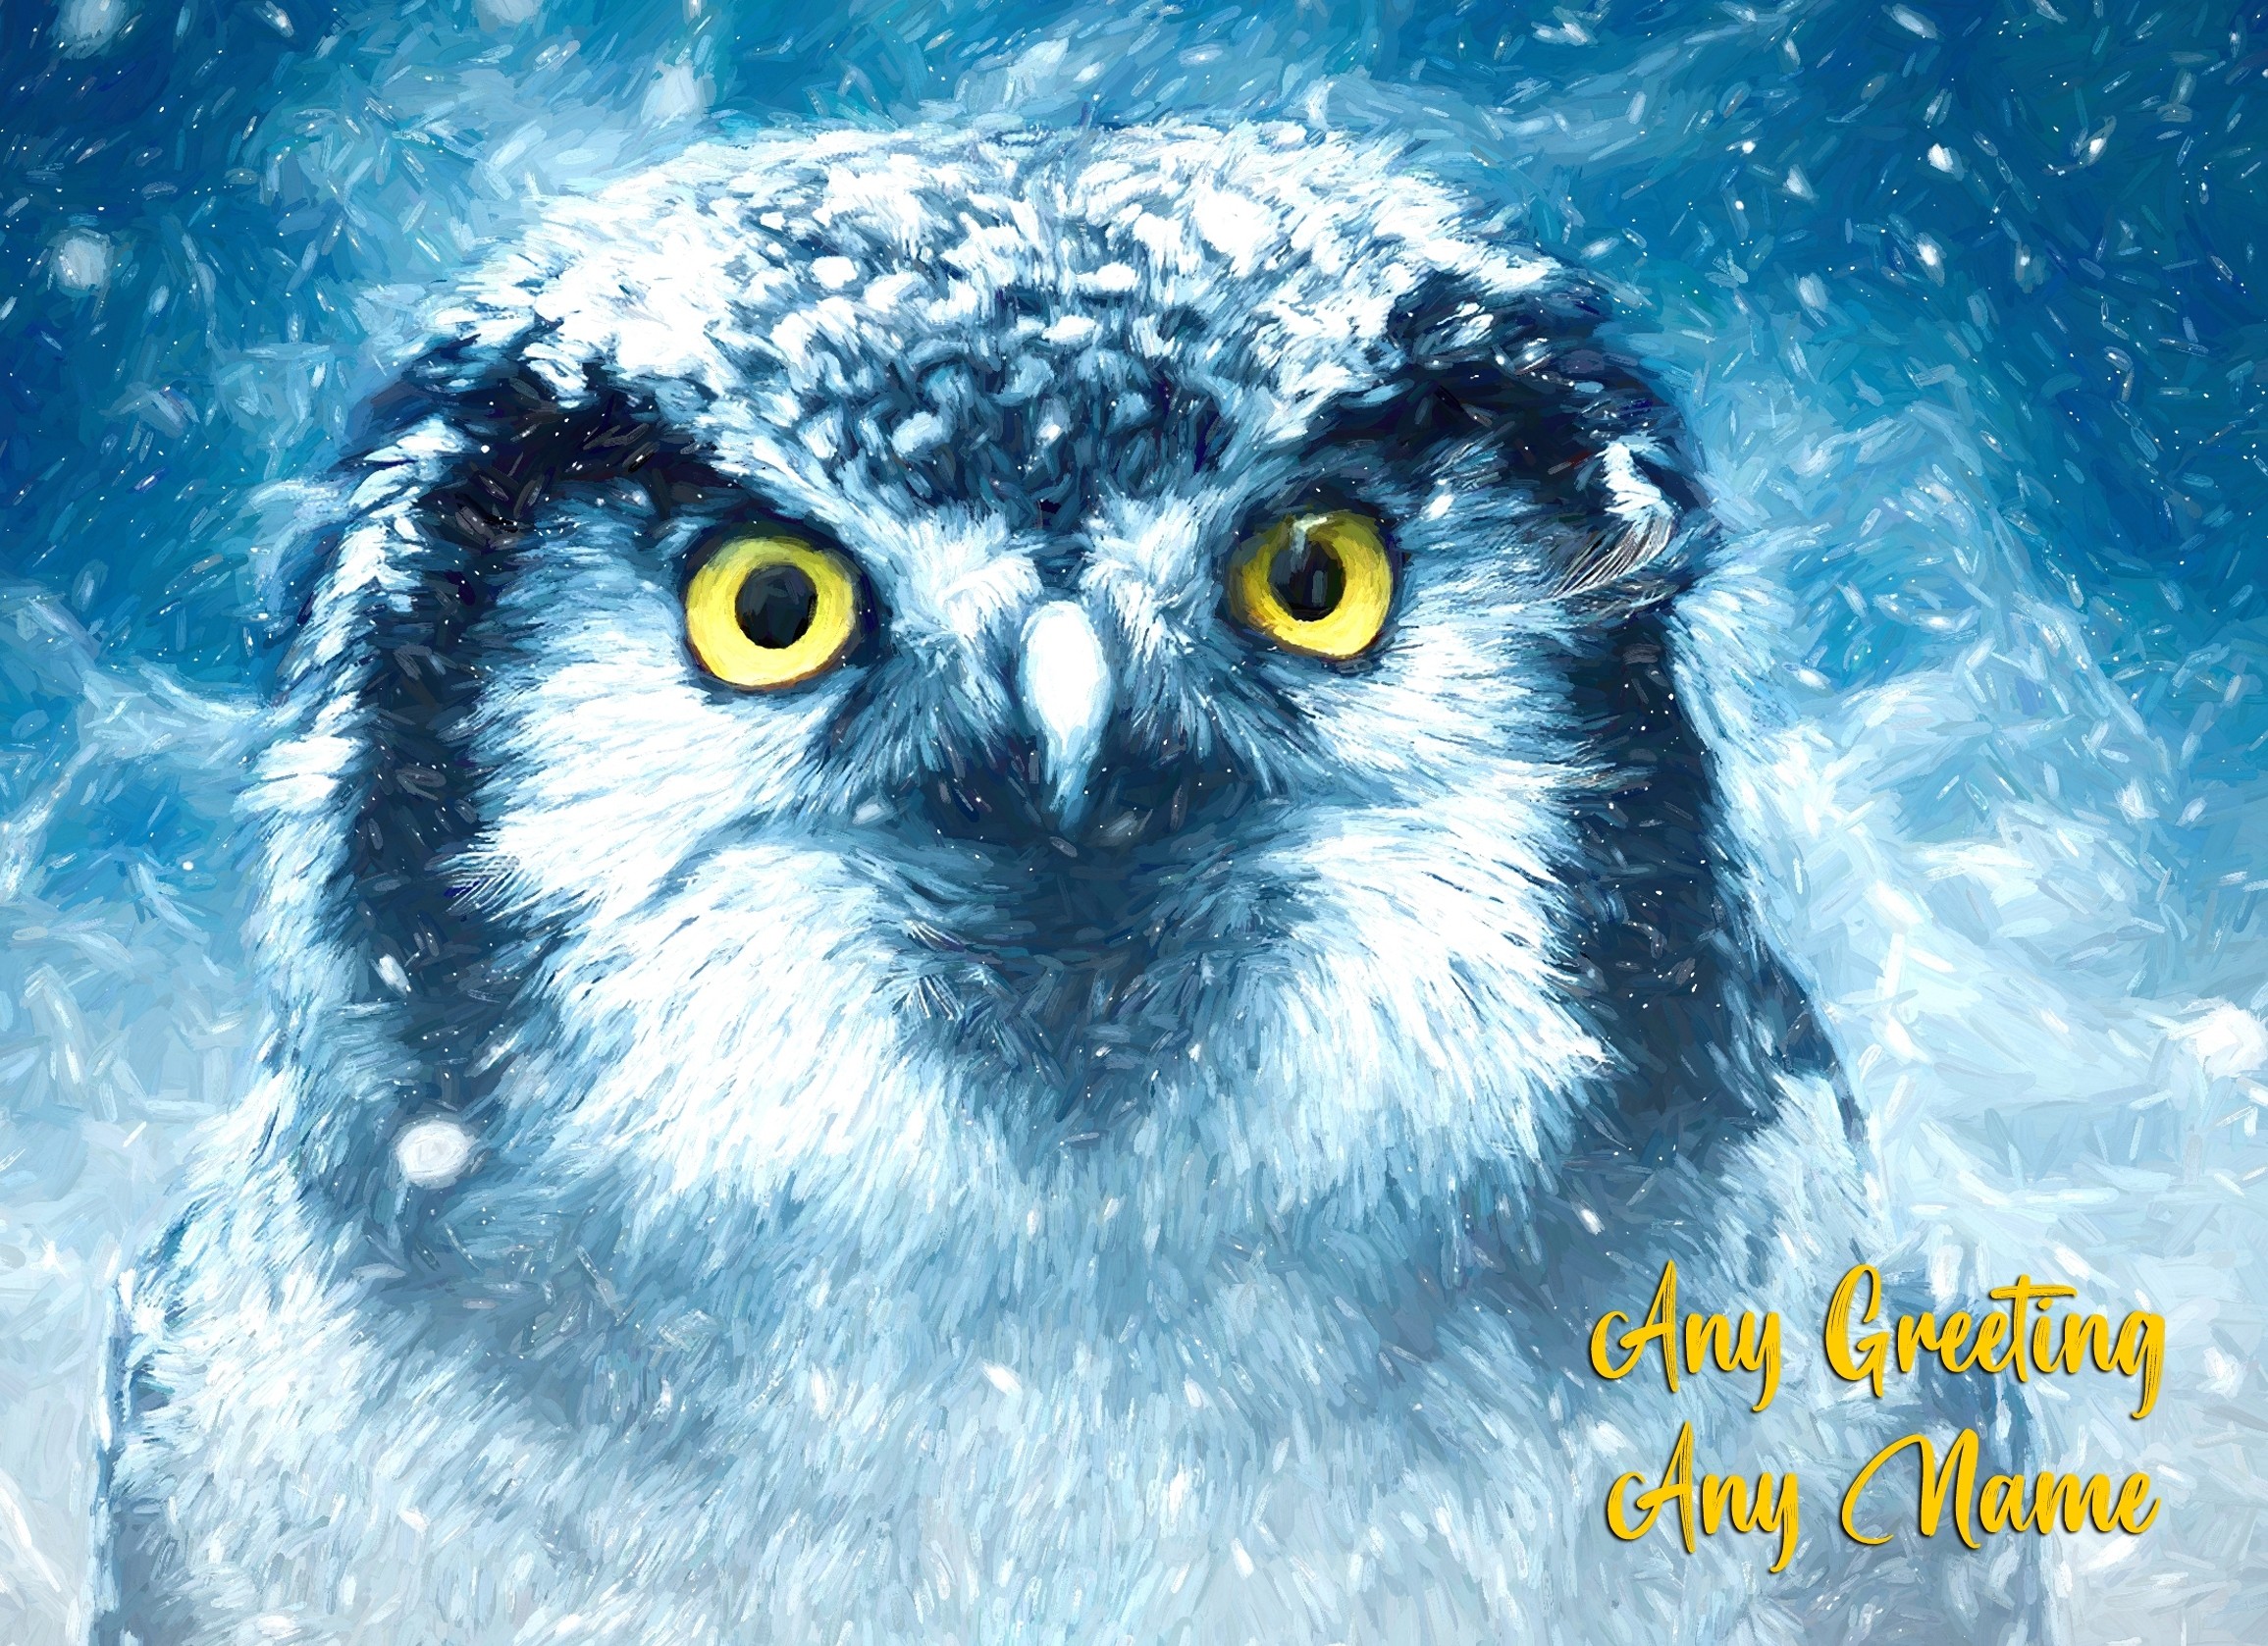 Personalised Owl Art Greeting Card (Birthday, Christmas, Any Occasion)